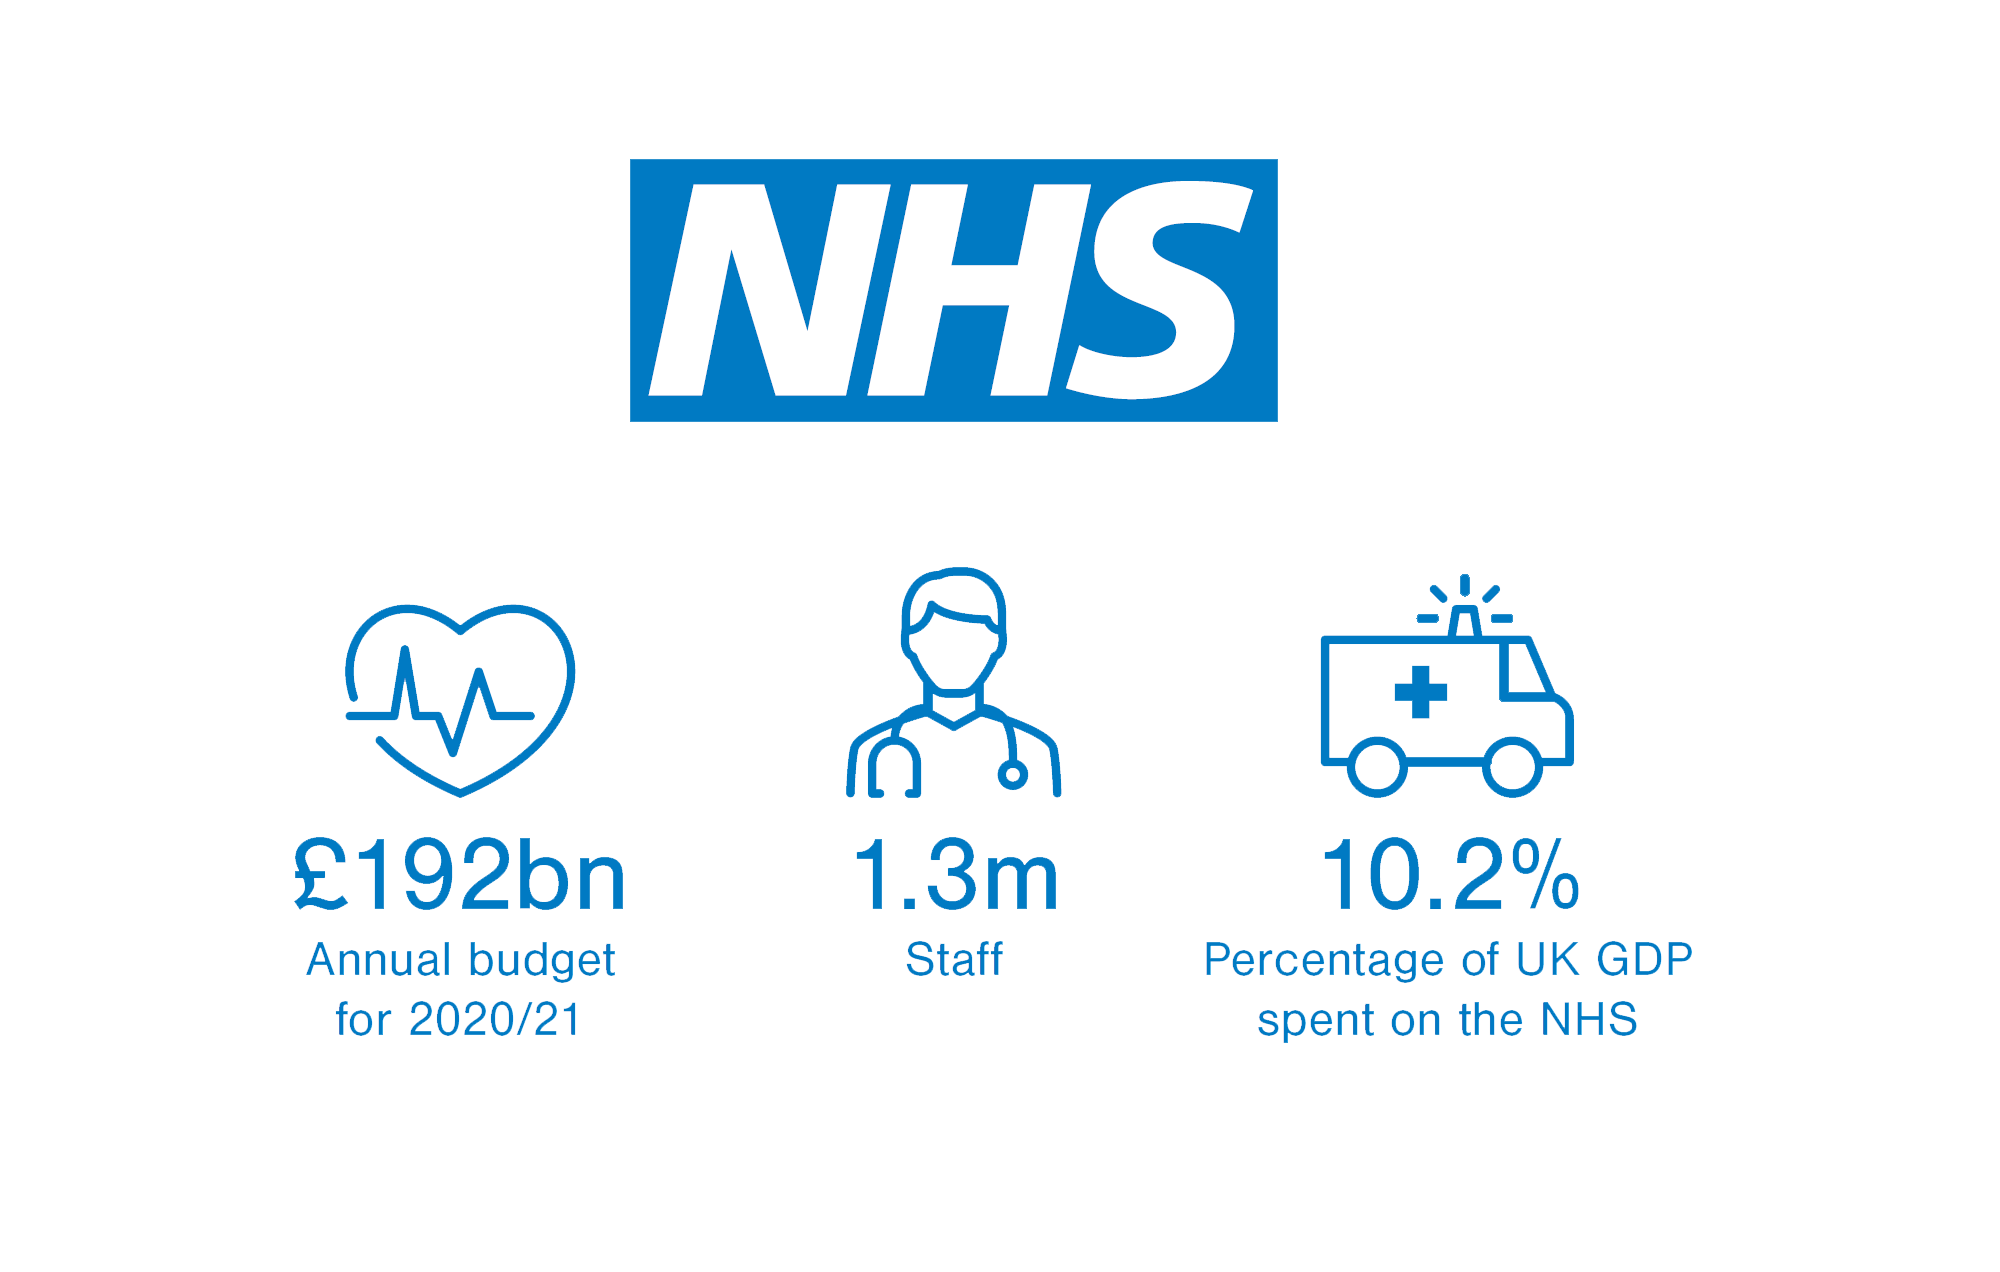 Sharpak was developed in conjunction with the UK’s NHS